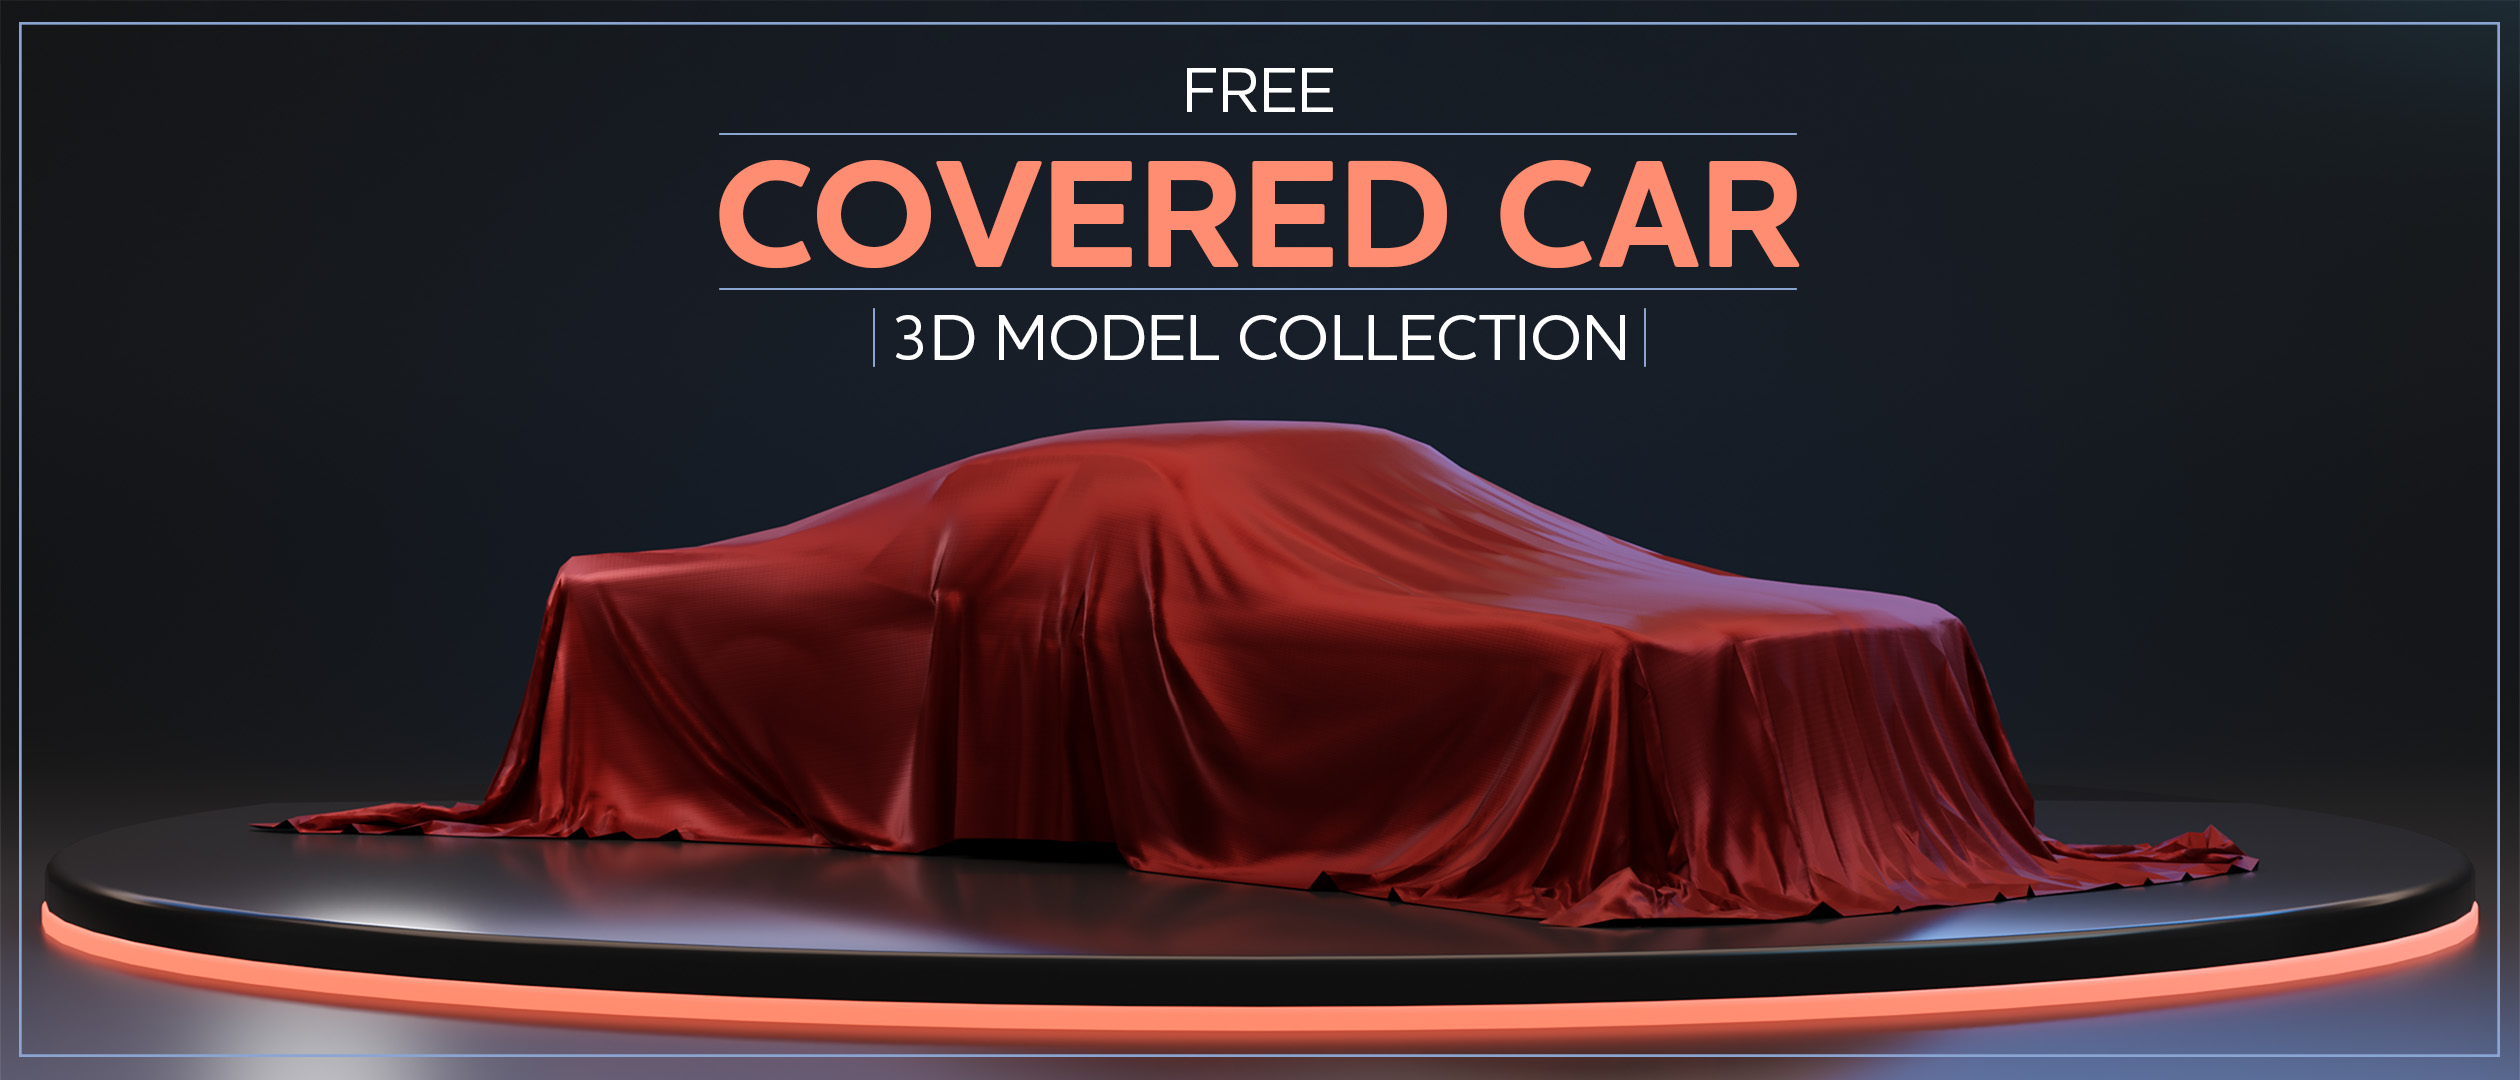 Free Covered Car 3D Model Collection